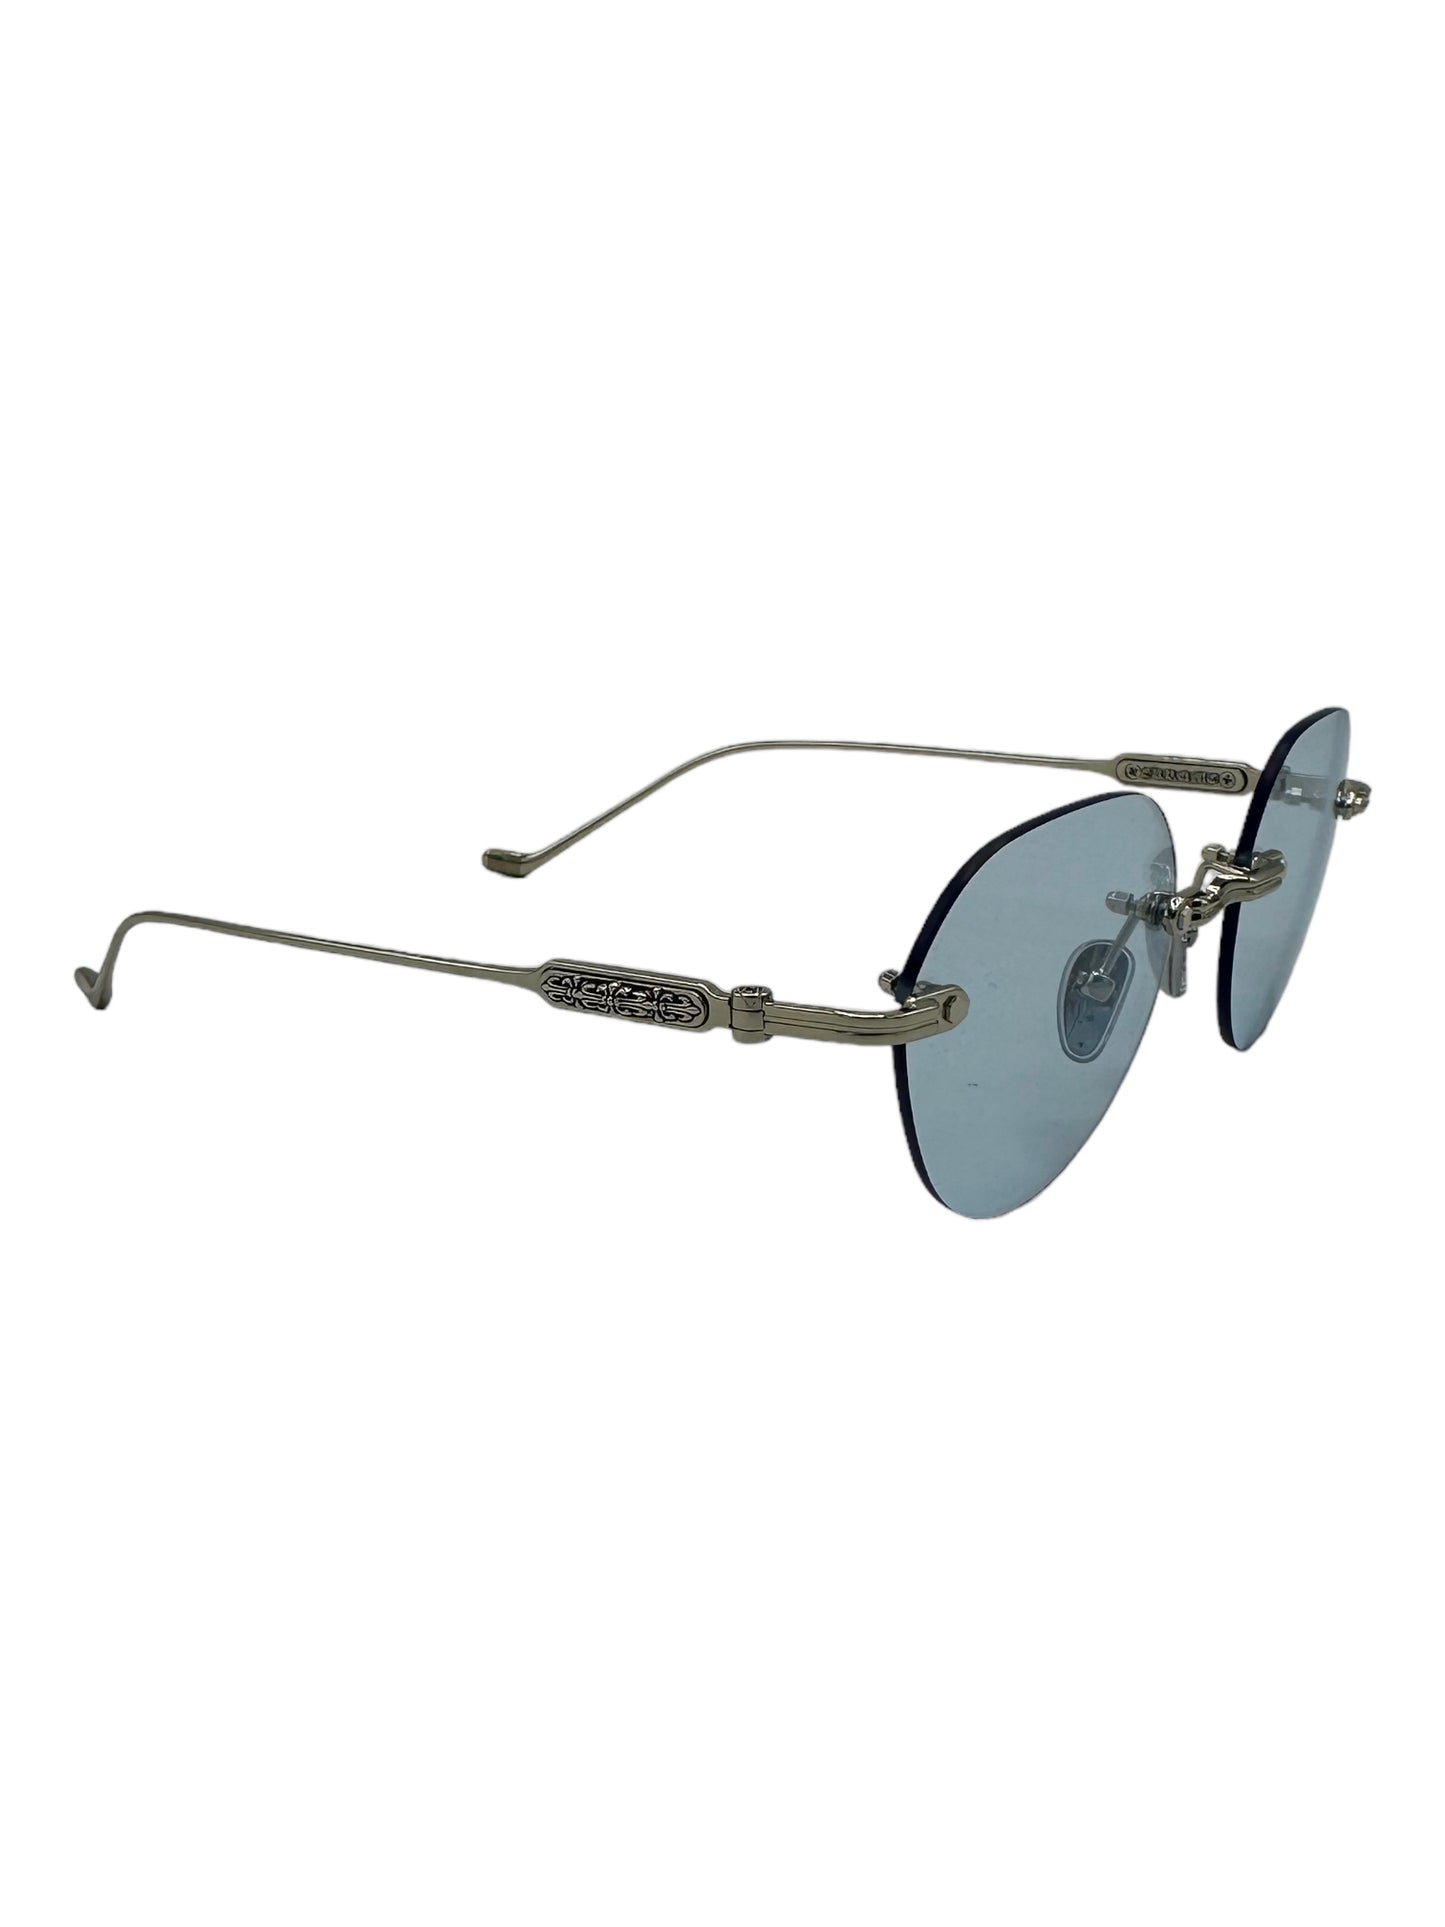 Chrome Hearts Blue Lens Rimless Sunglasses - Genuine Design Luxury Consignment for Men. New & Pre-Owned Clothing, Shoes, & Accessories. Calgary, Canada